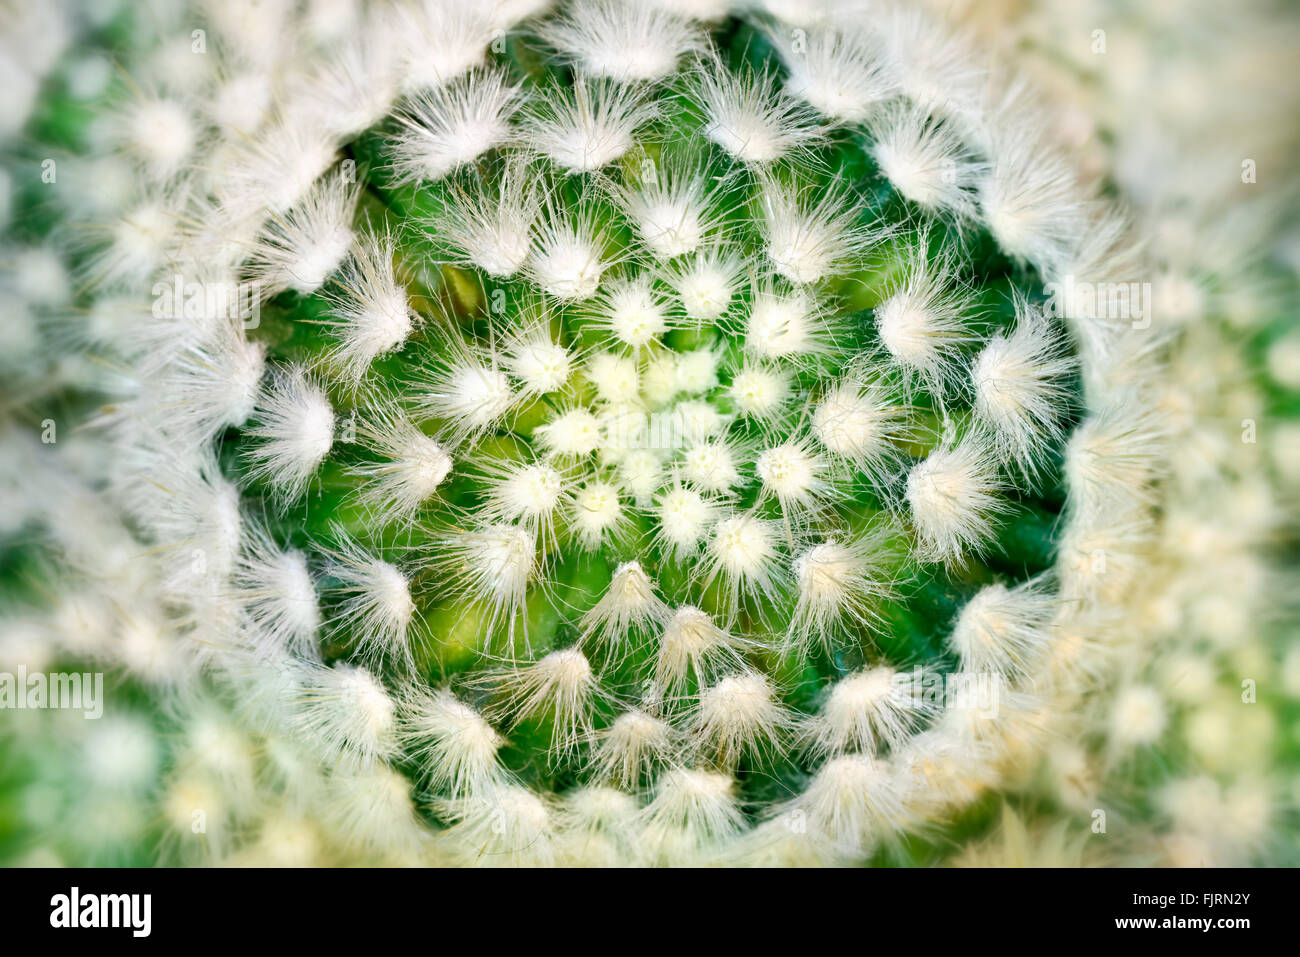 Plants and trees: cactus close-up, abstract floral pattern Stock Photo